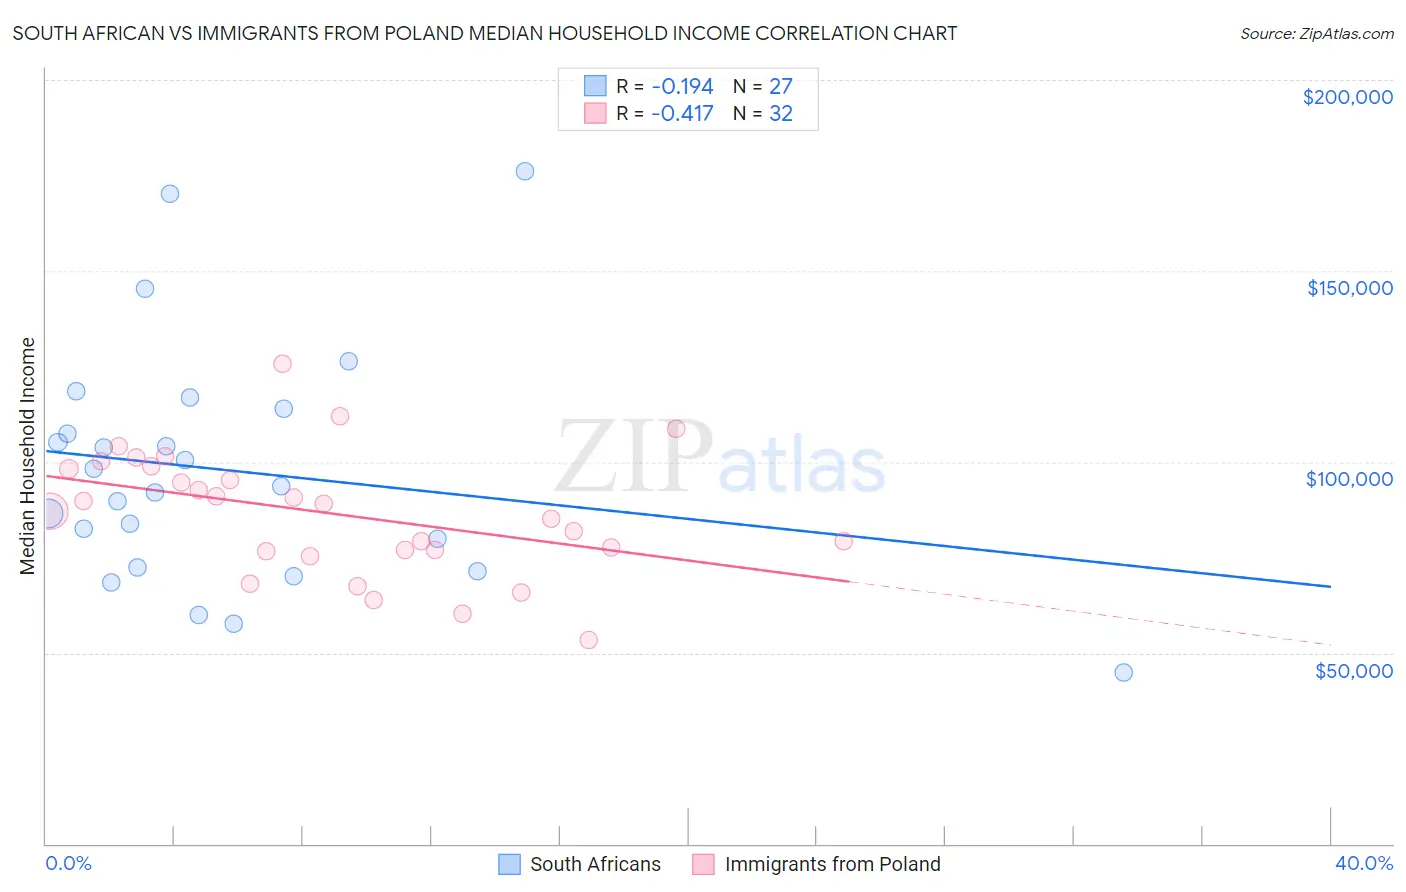 South African vs Immigrants from Poland Median Household Income